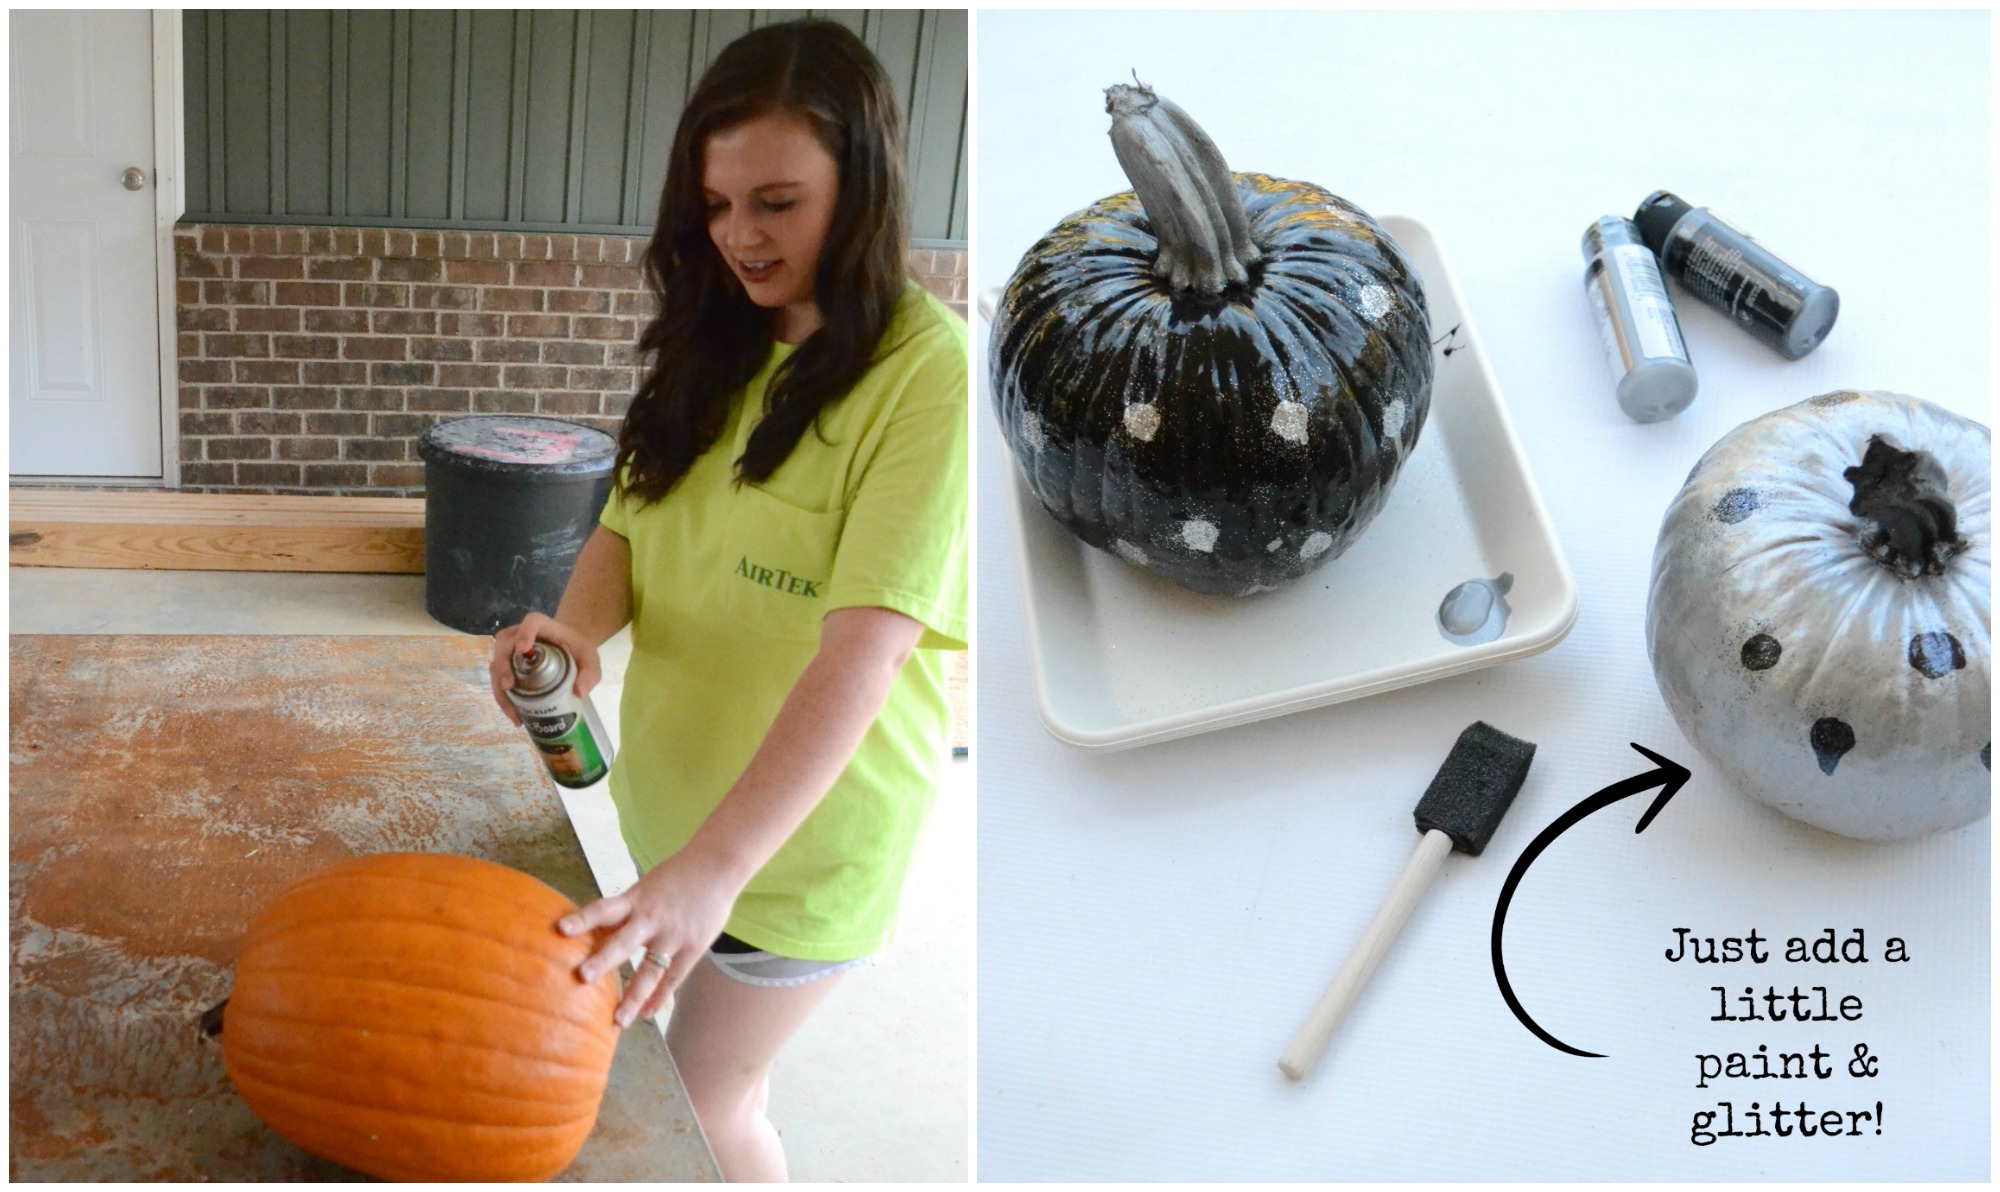 See how we're breaking in our brand new home with glam Halloween decor found exclusively at Lowes! #ad #LowesFallDecor #IC